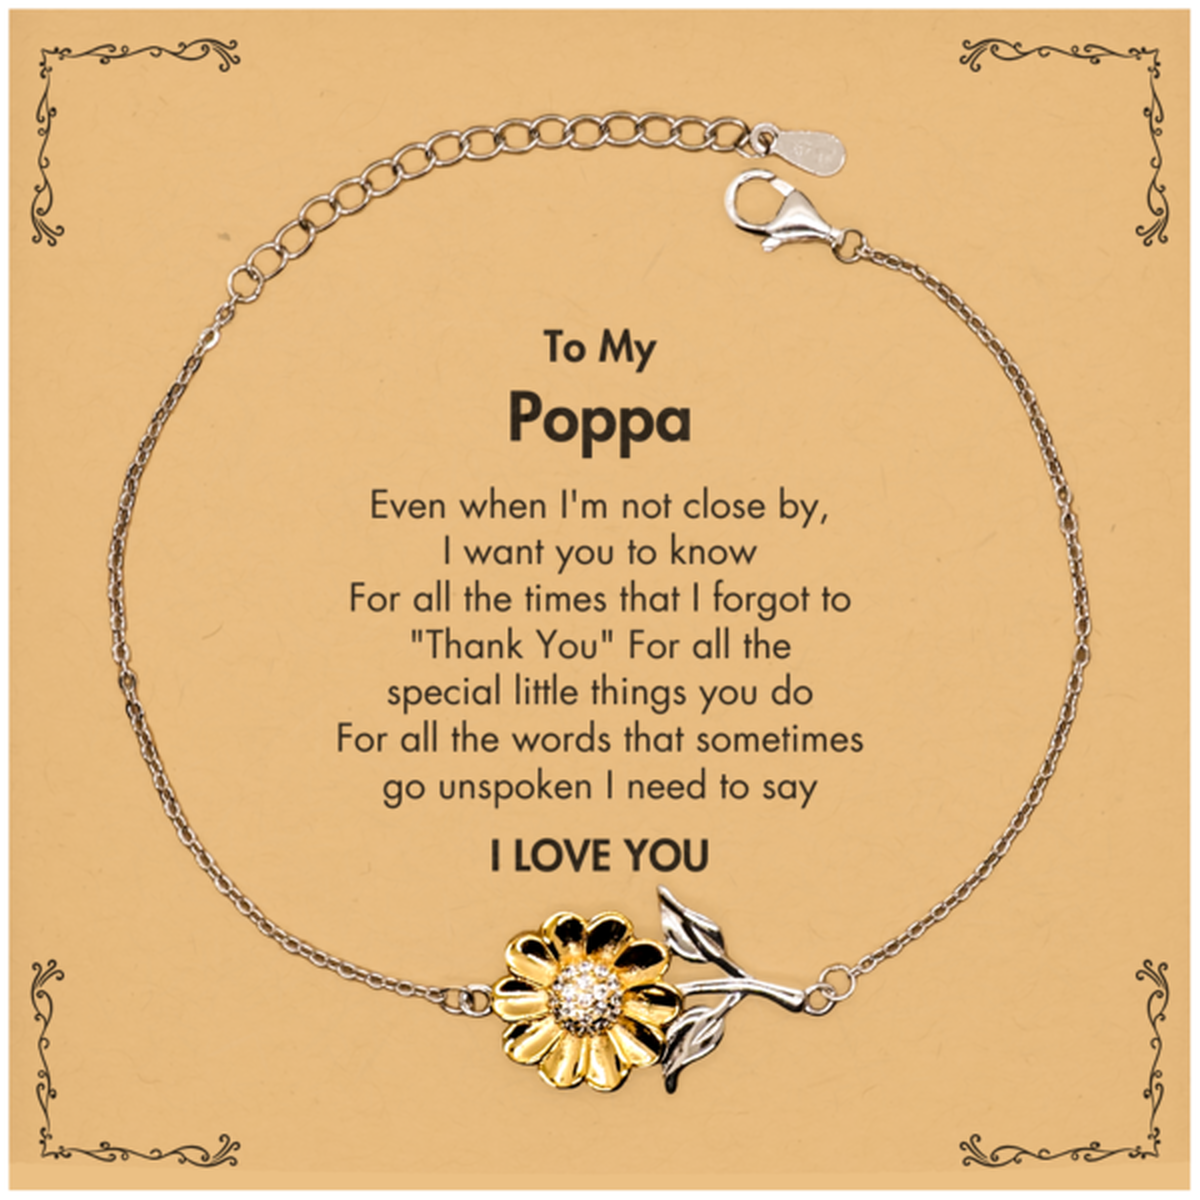 Thank You Gifts for Poppa, Keepsake Sunflower Bracelet Gifts for Poppa Birthday Mother's day Father's Day Poppa For all the words That sometimes go unspoken I need to say I LOVE YOU